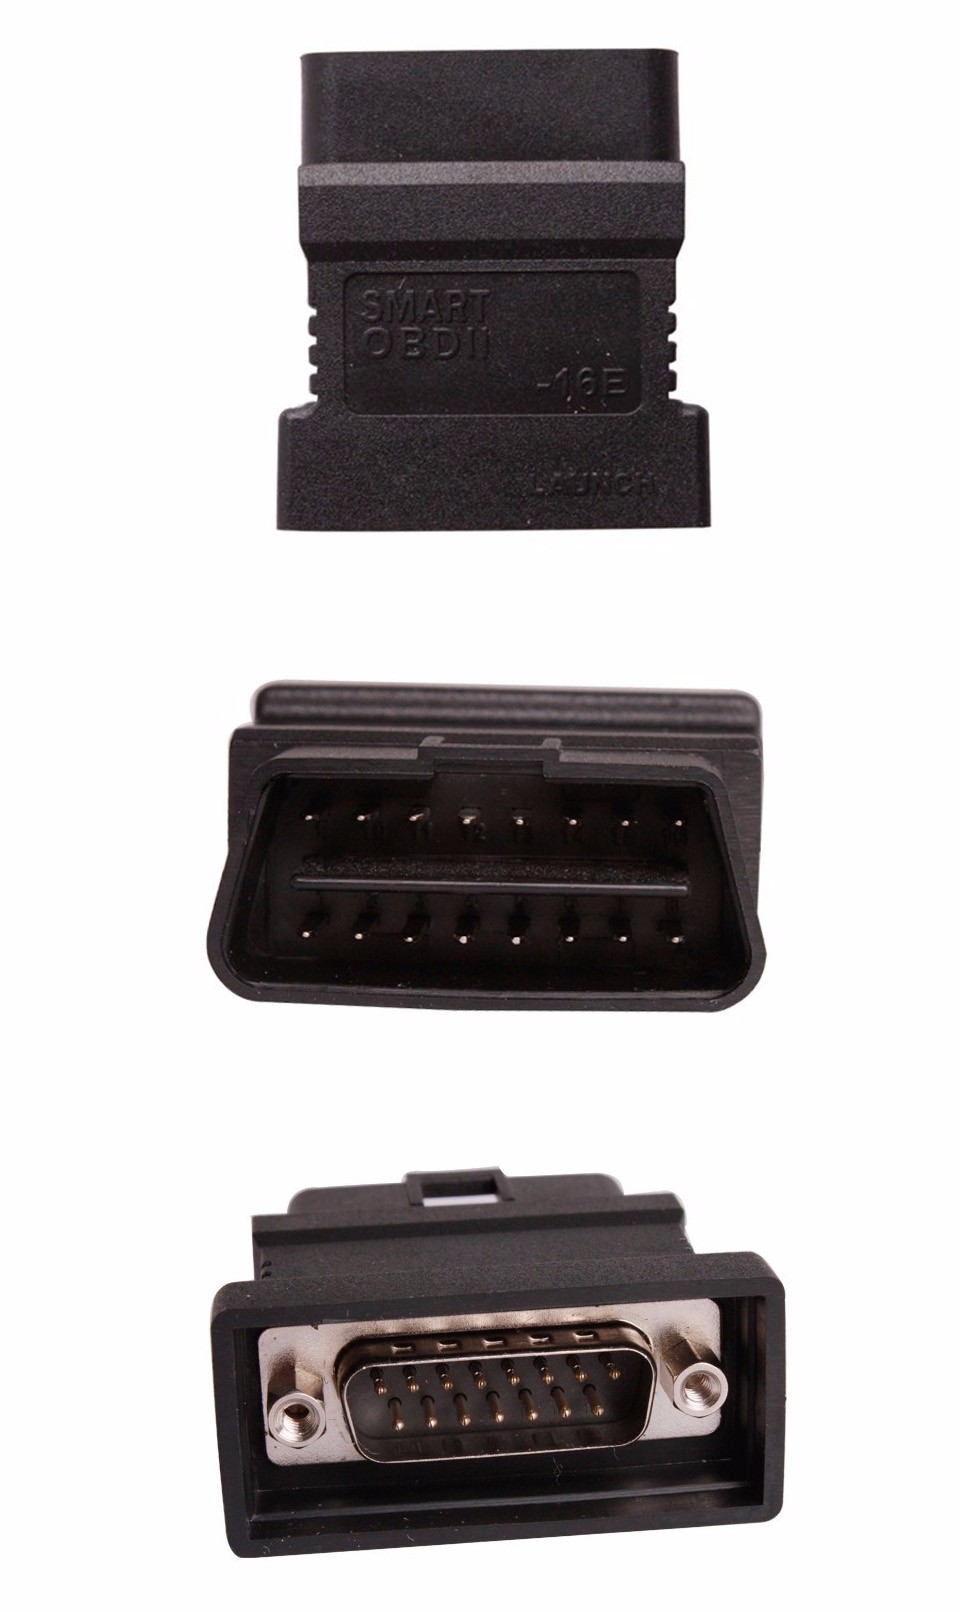 Top-selling-Original-X-431-Smart-OBDII-16-16E-Connector-for-Launch-X431-GX3-free-shipping-1